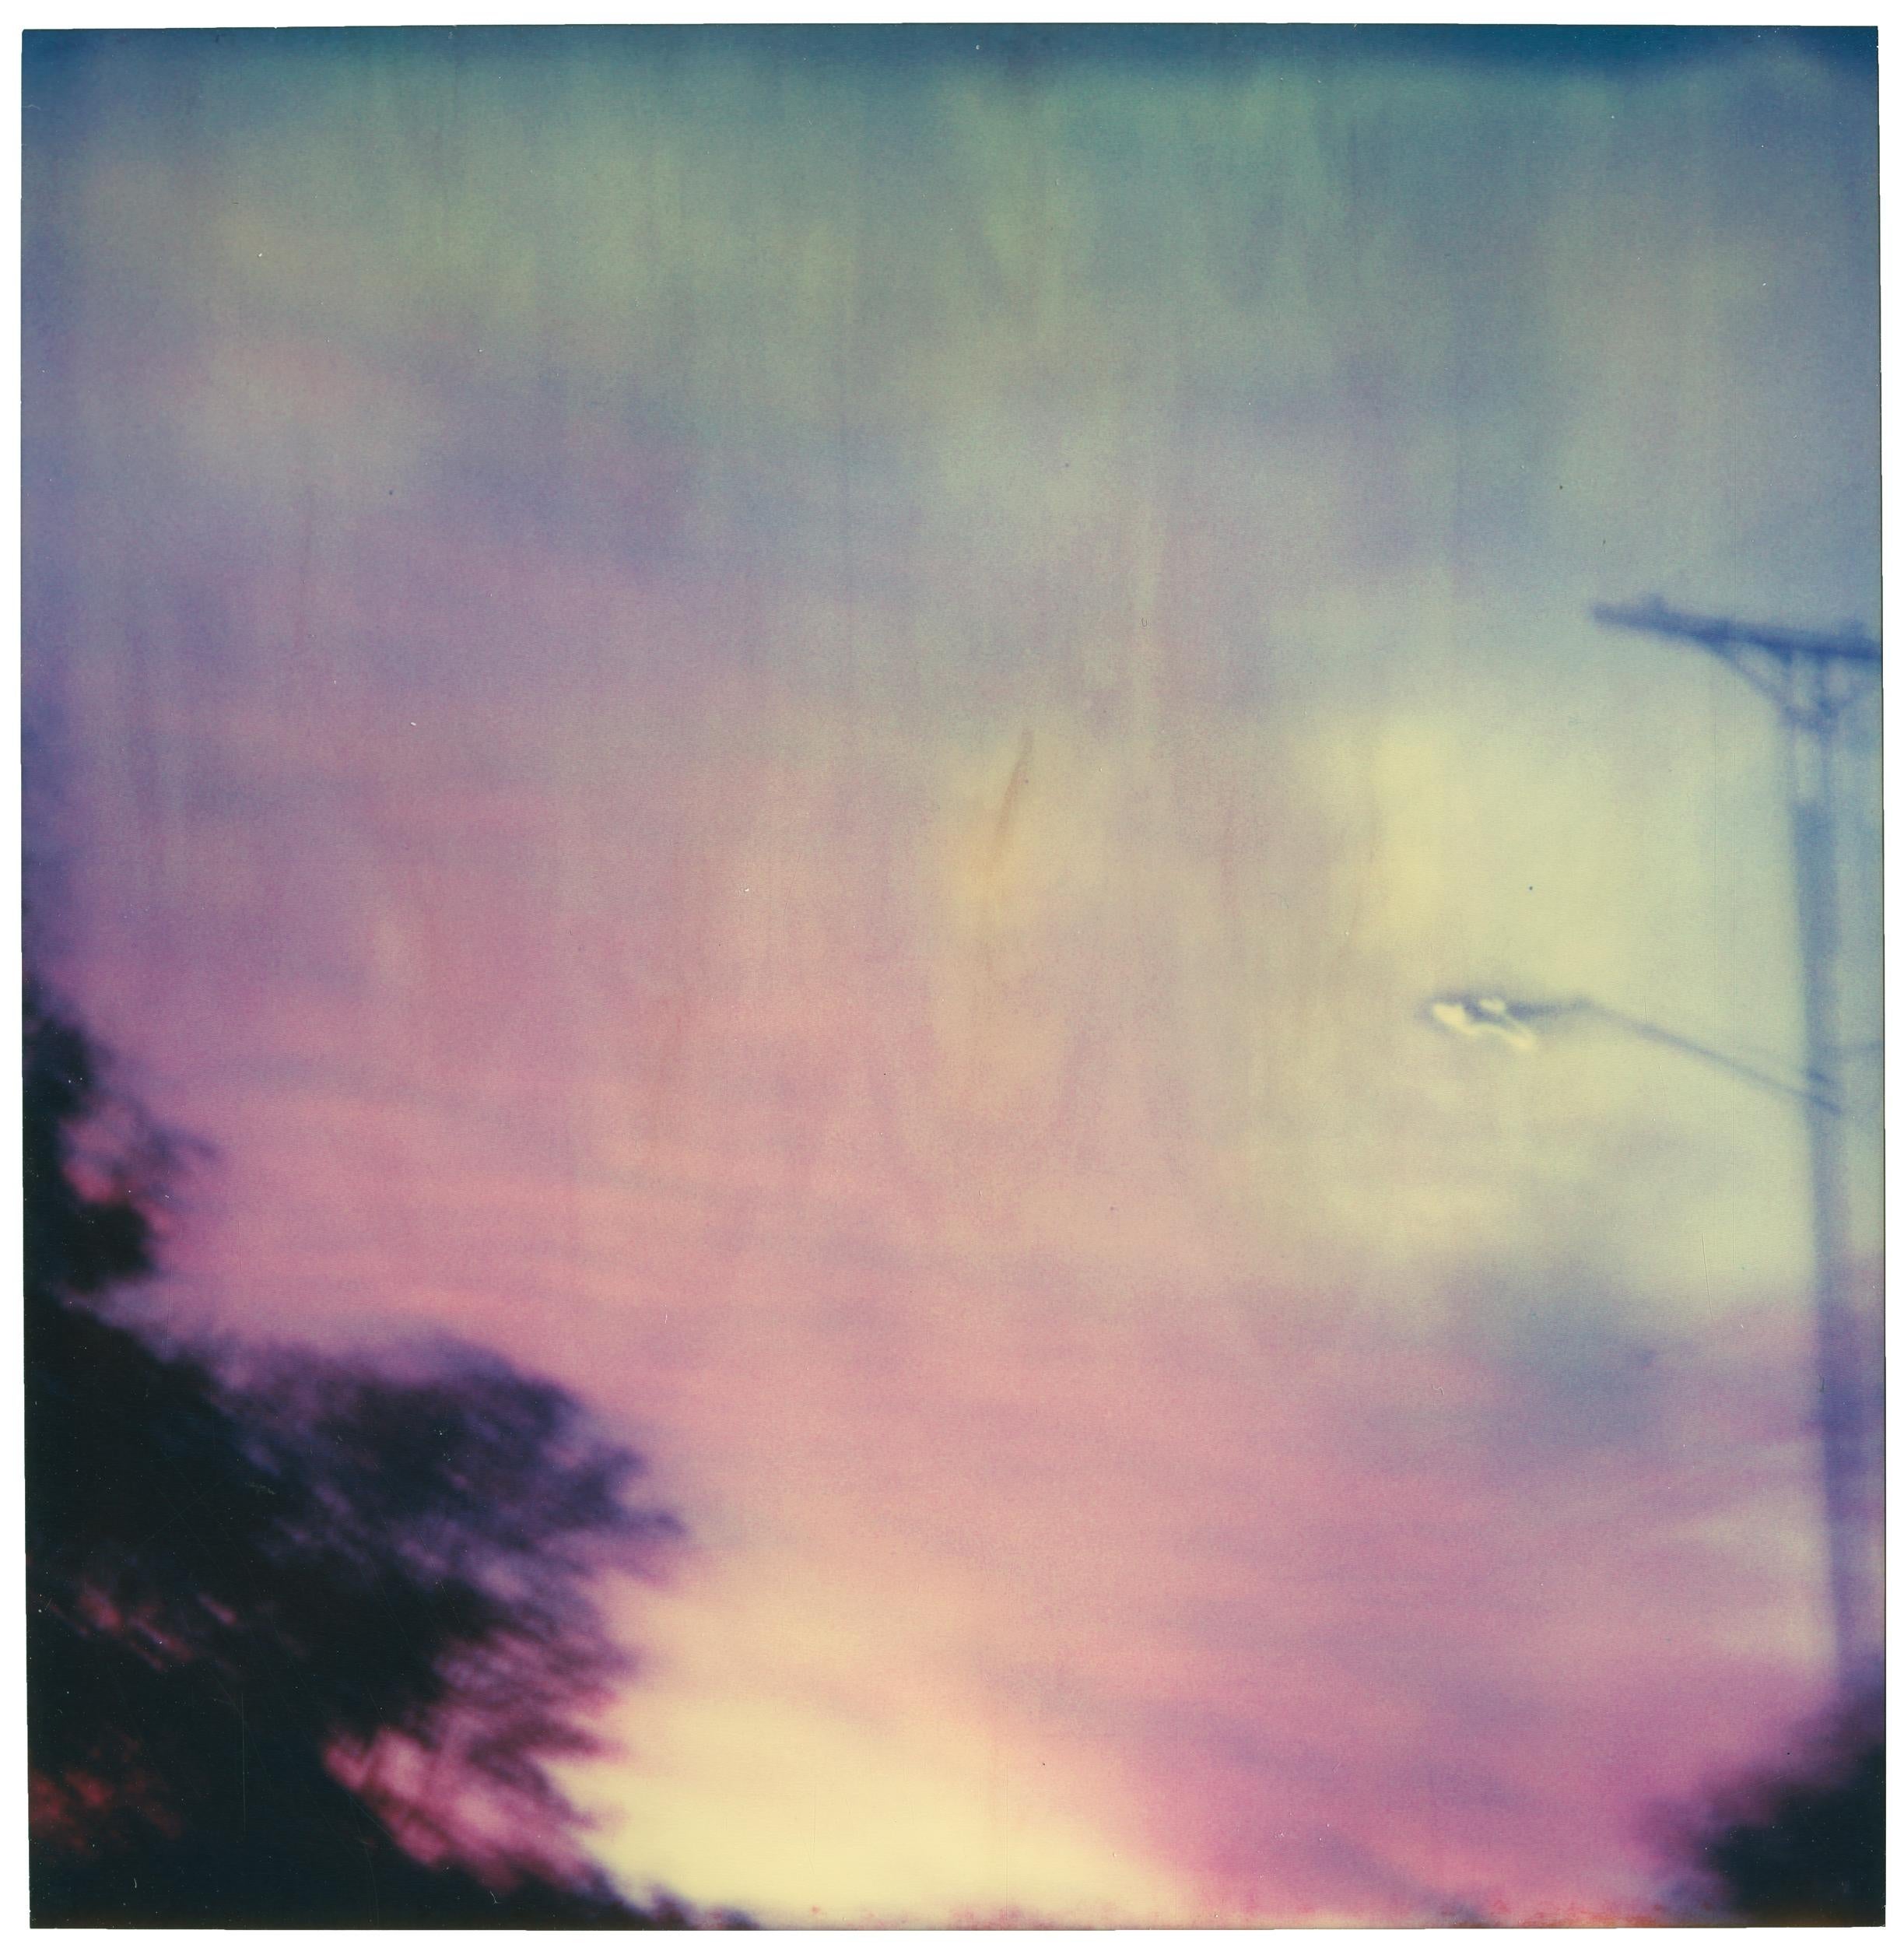 Dusk (The Last Picture Show) - 2005

Edition 4/5,
38x36cm each, 131x127cm installed including gaps.
9 Analog C-PrintS, hand-printed by the artist on Archive Fuji Chrystal Paper, based on the 9 original PolaroidS.
Certificate and signature